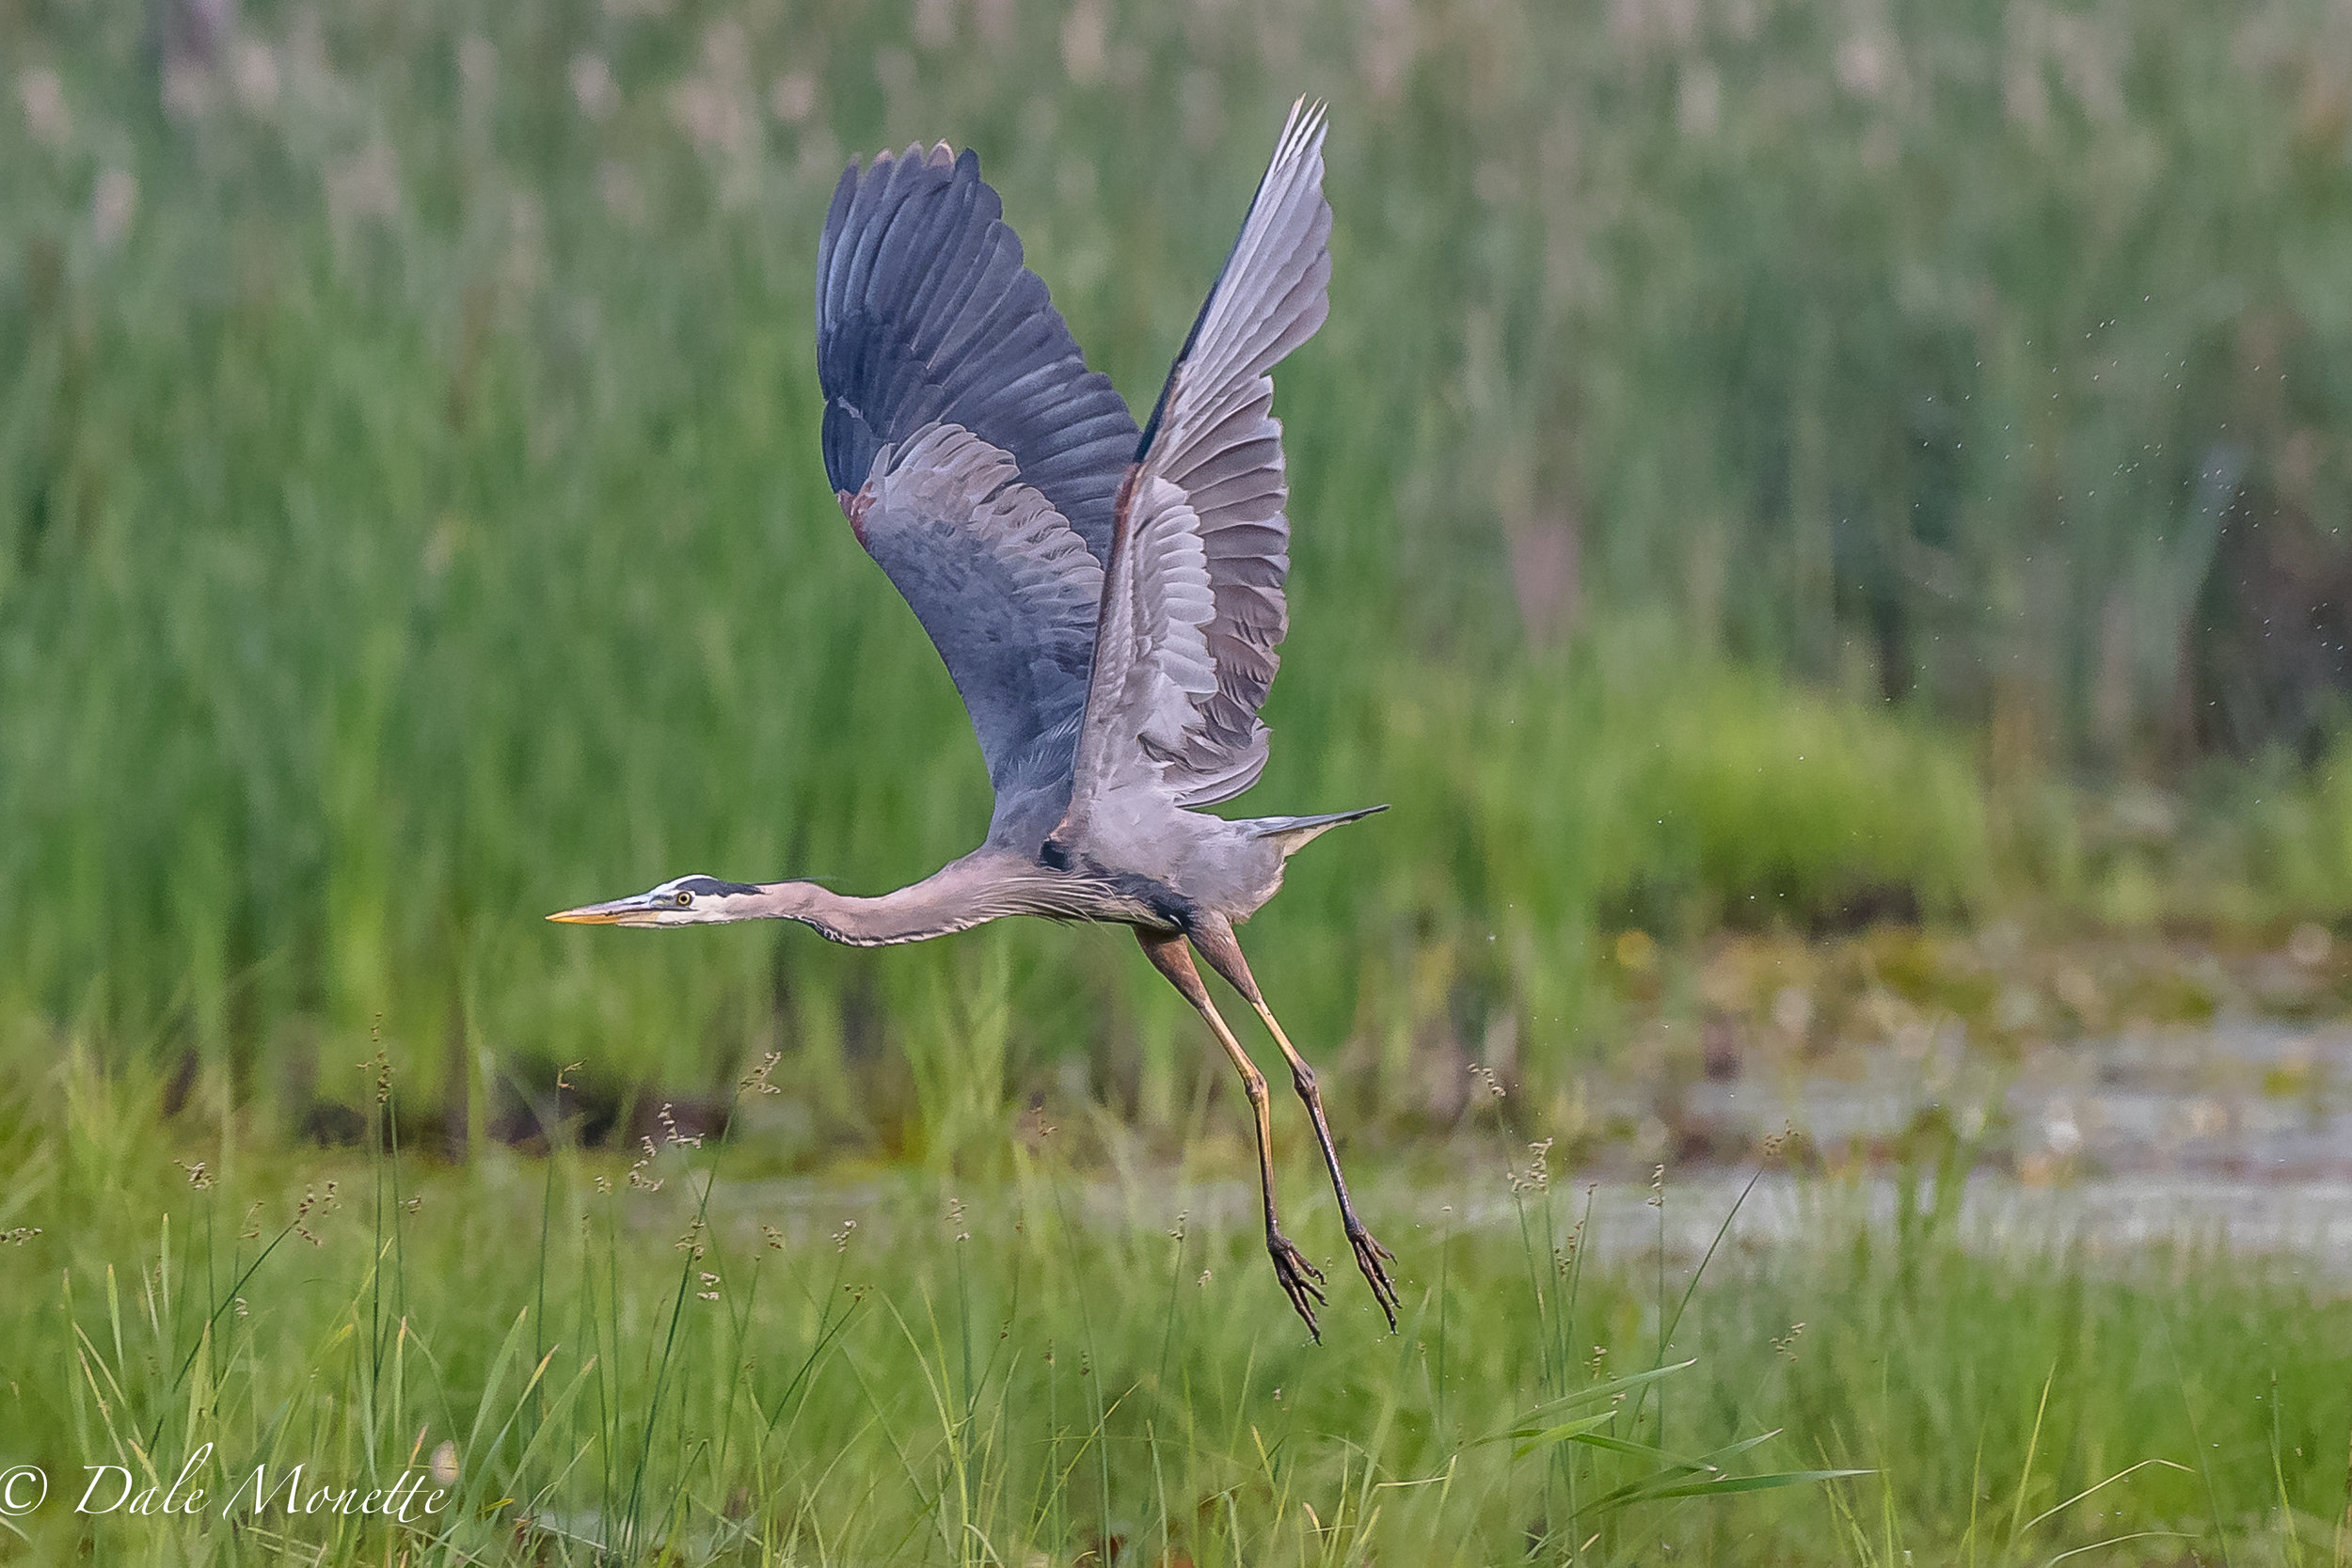   A great blue heron lifts off from a local beaver pond today.......6/30/17  